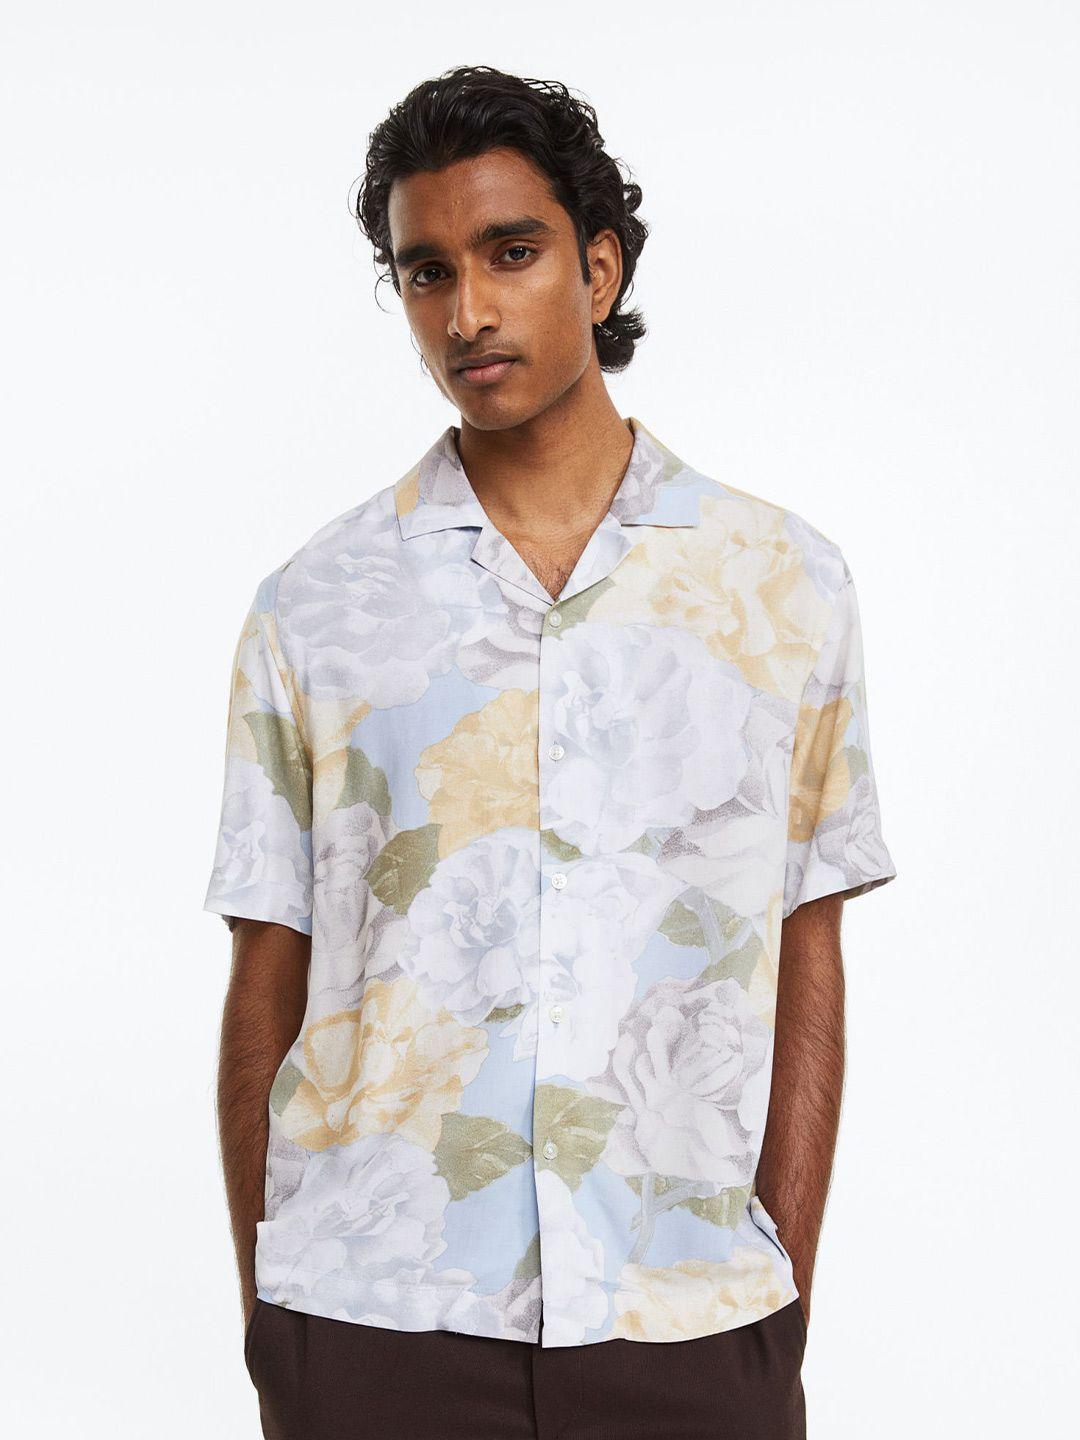 h&m relaxed fit patterned resort shirt